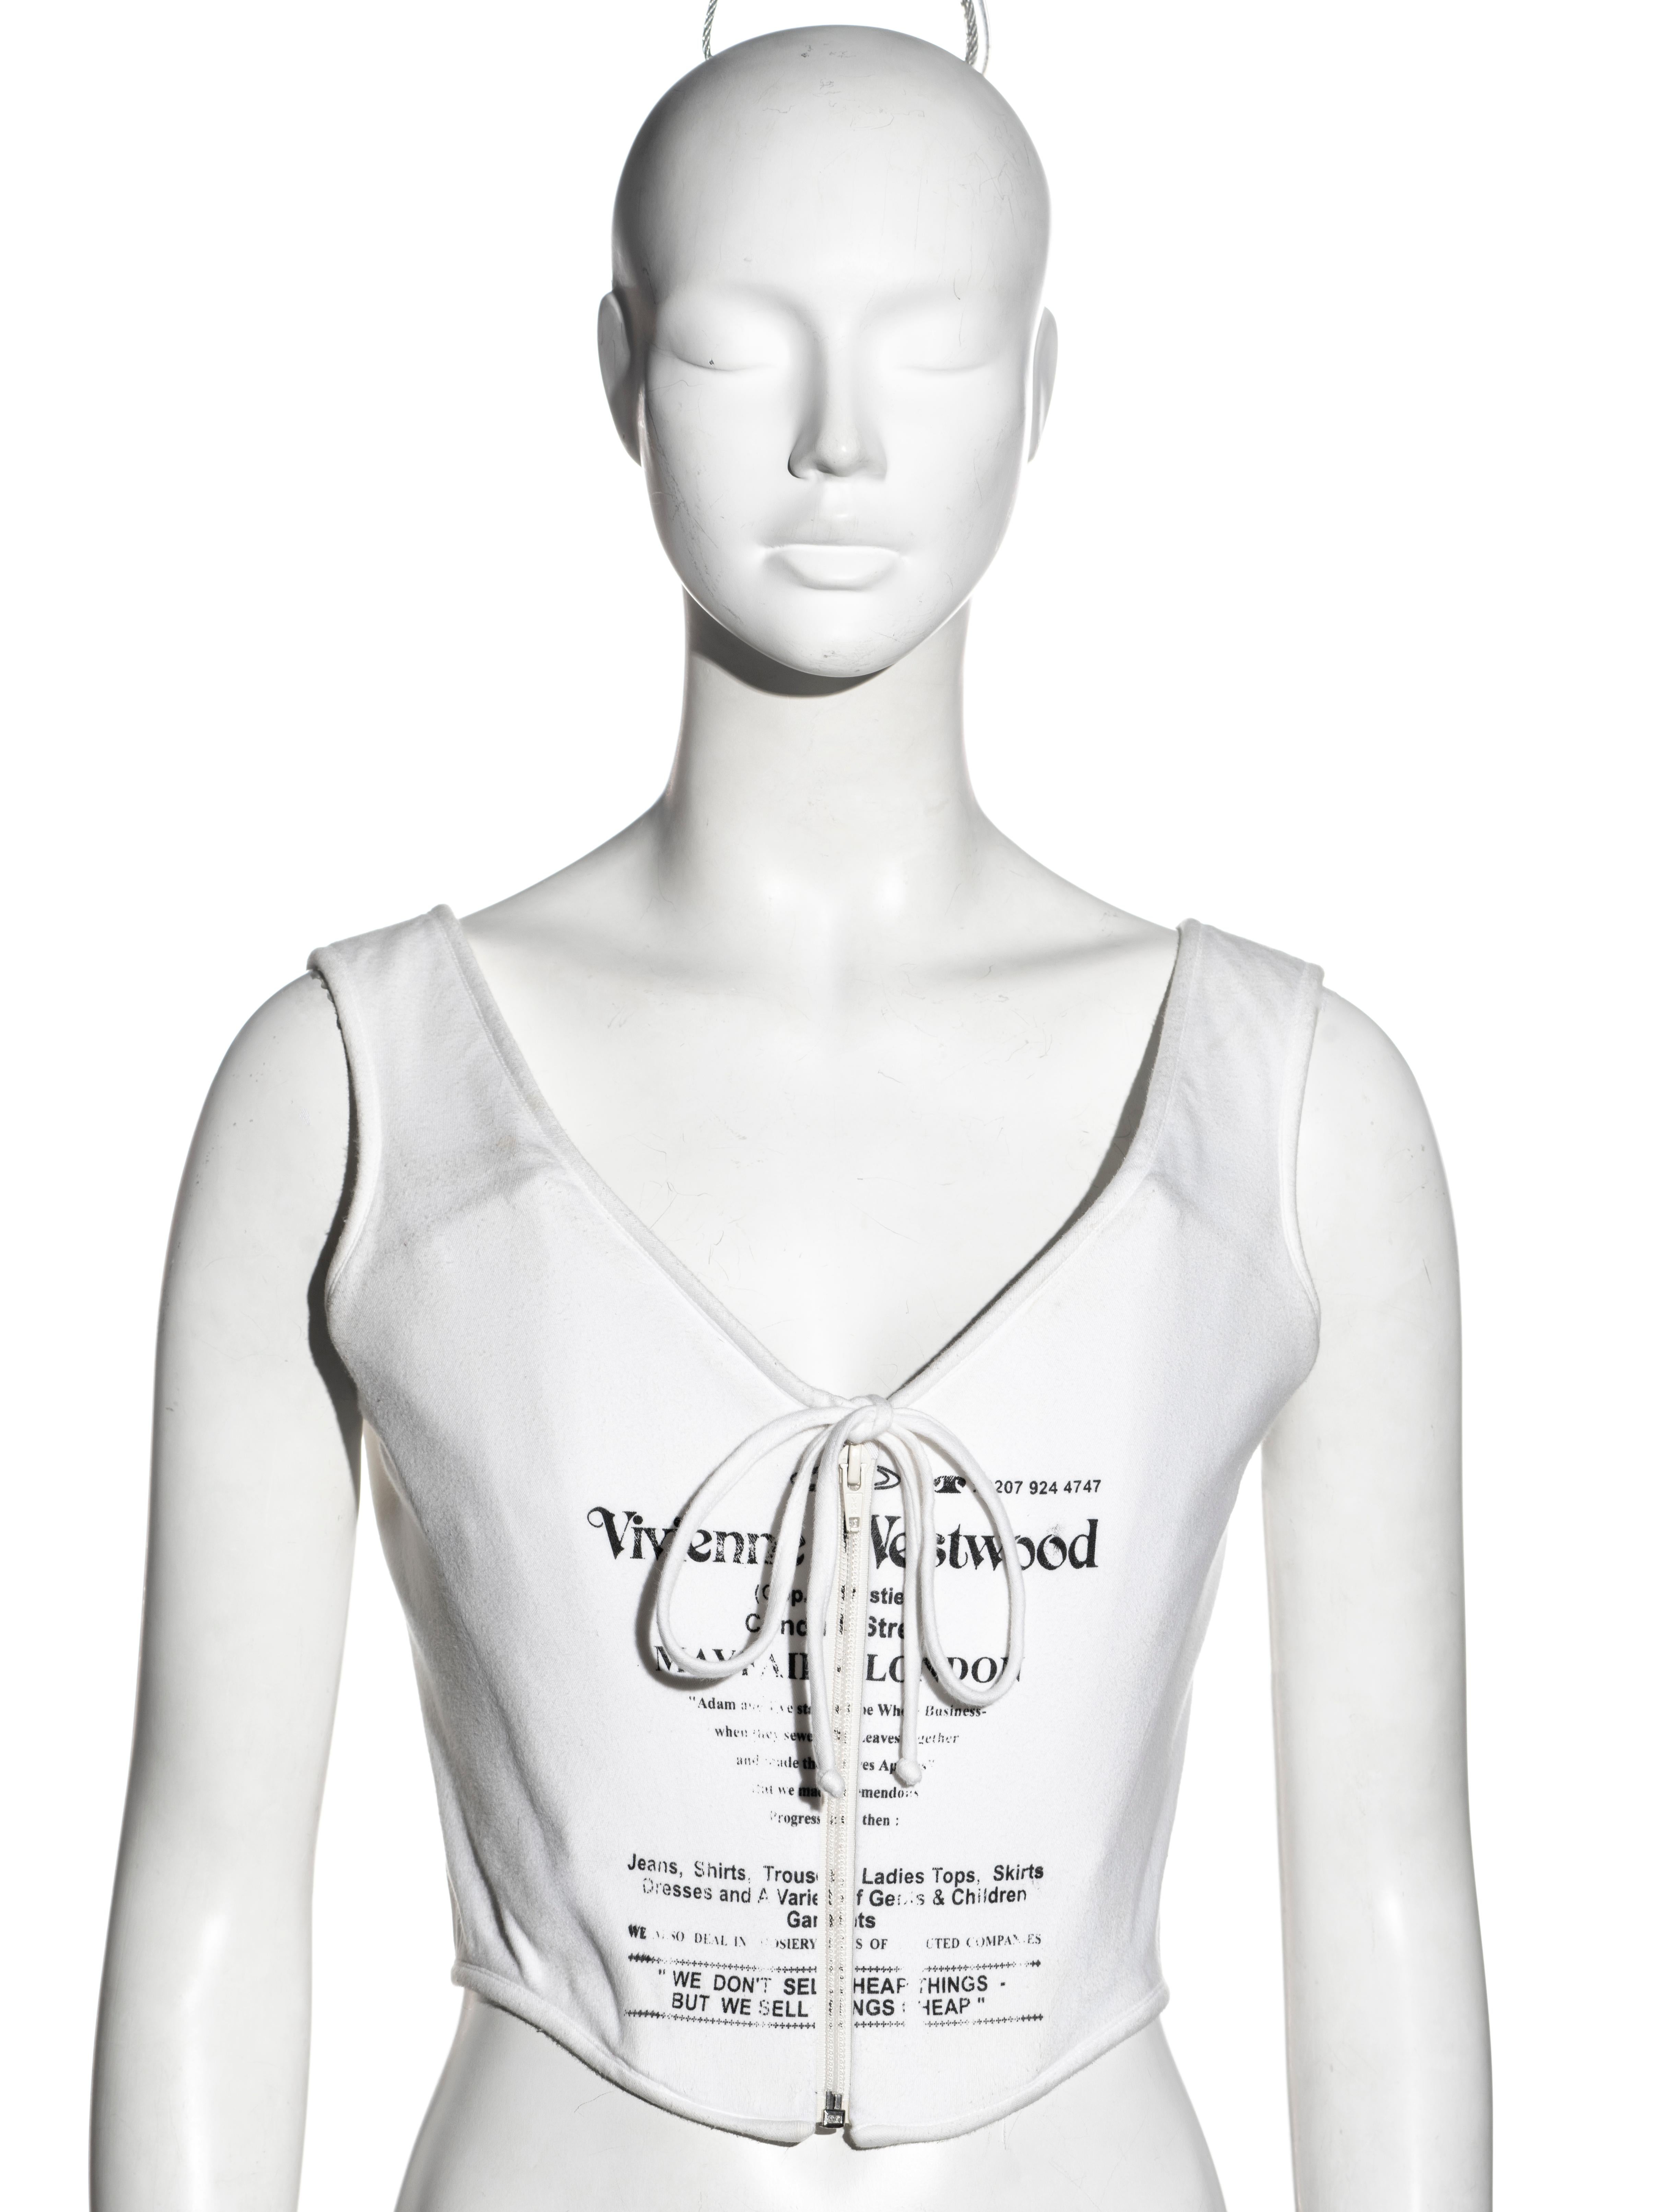 ▪ Vivienne Westwood corset top
▪ Spring-Summer 2002
▪ White cotton jersey 
▪ Black text print of a Vivienne Westwood flyer, advertising the Conduit Street store in London
▪ Centre-front zipper
▪ Gold label 
▪ UK 14